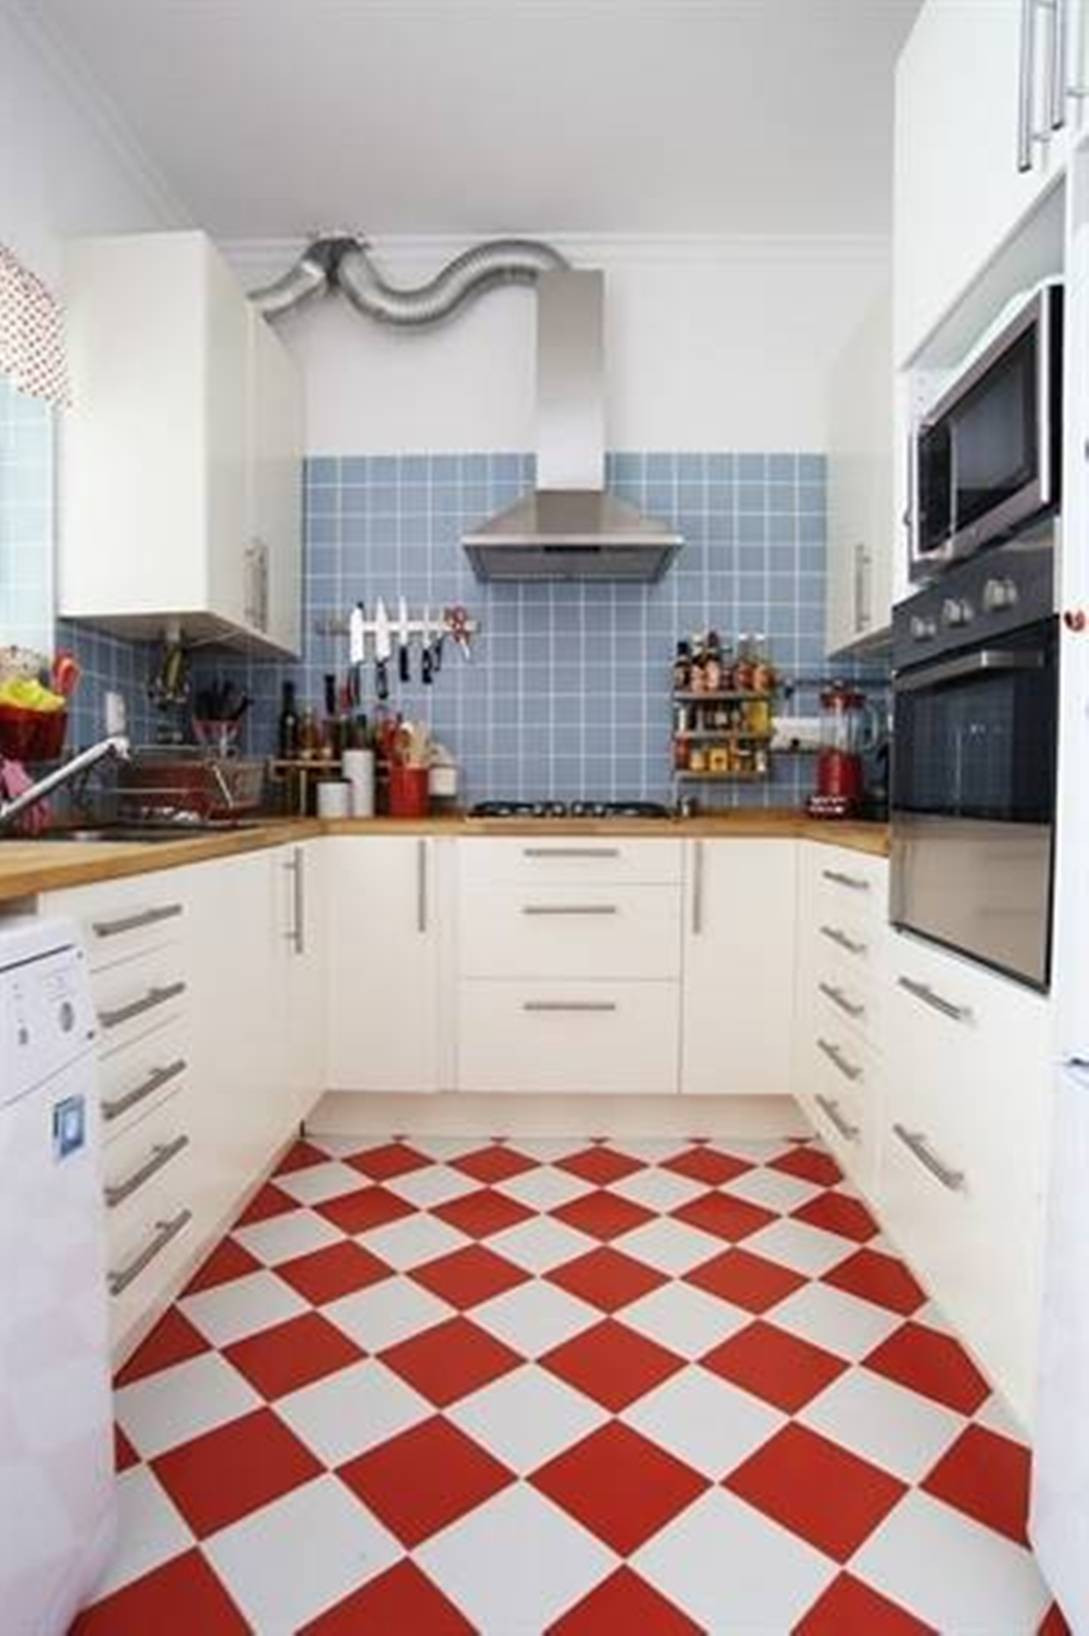 White Kitchen With Tile Floor
 red white kitchen floor tiles and Furniture